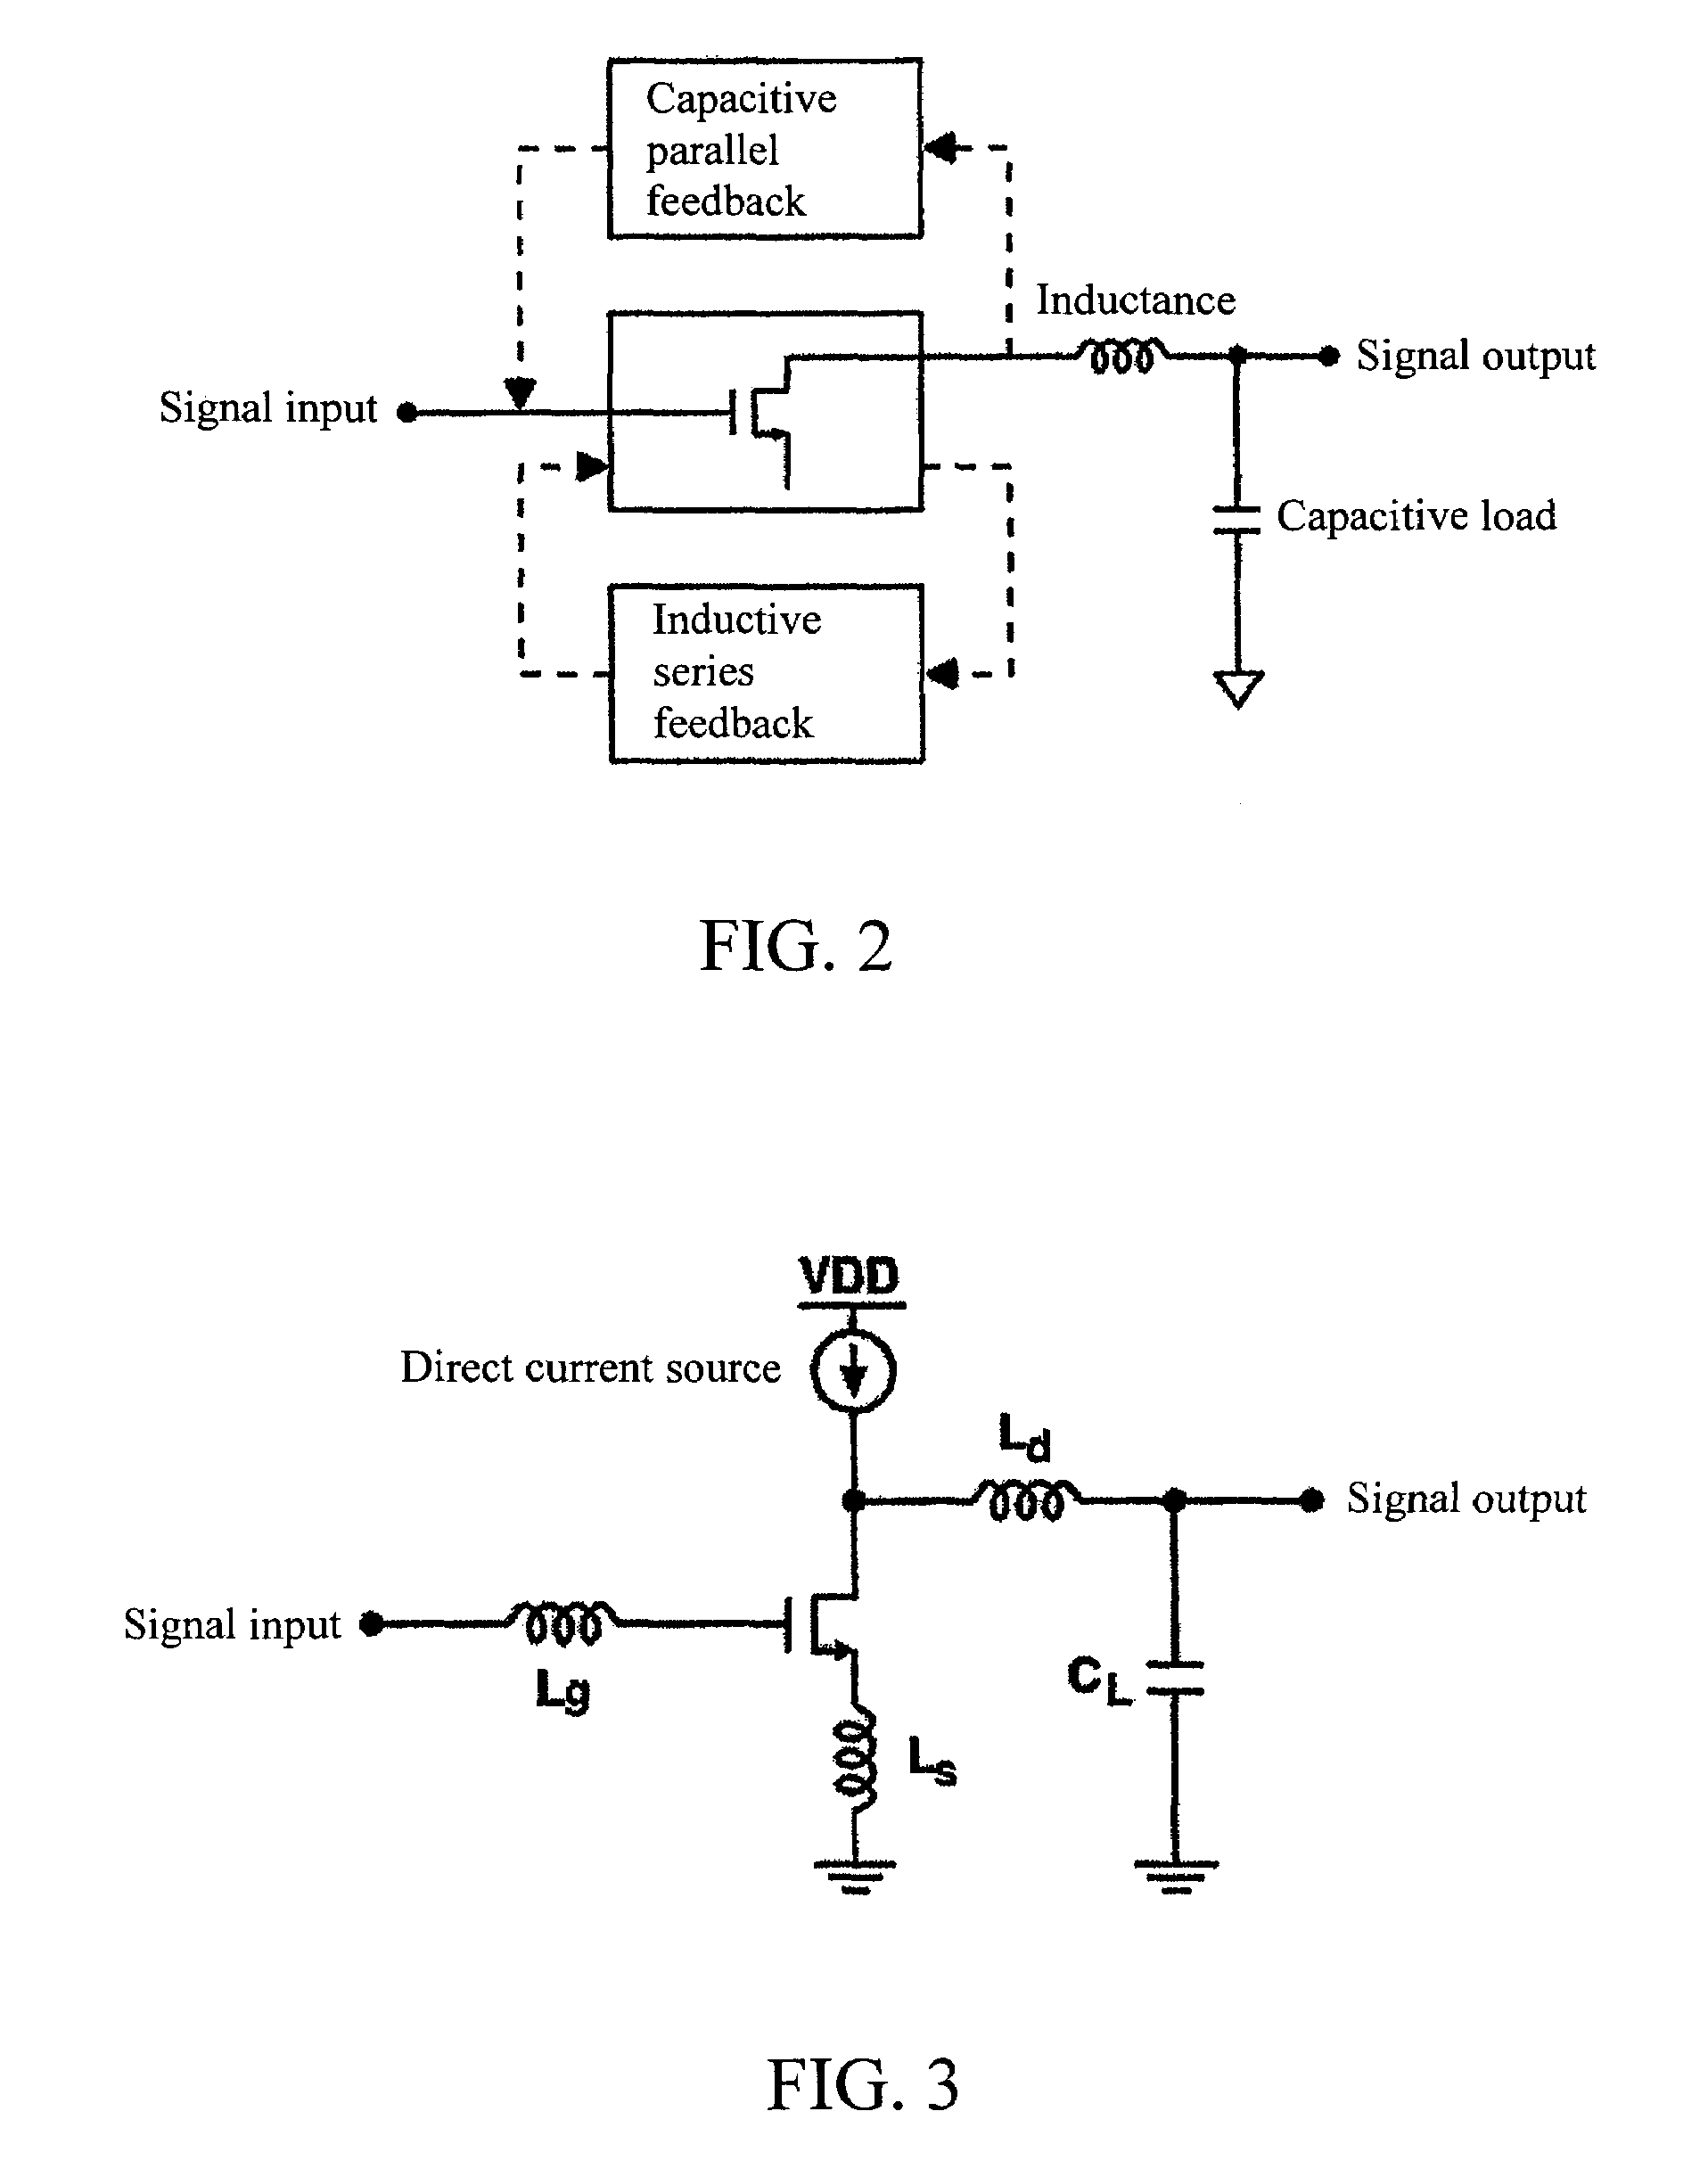 Ultra broad-band low noise amplifier utilizing dual feedback technique